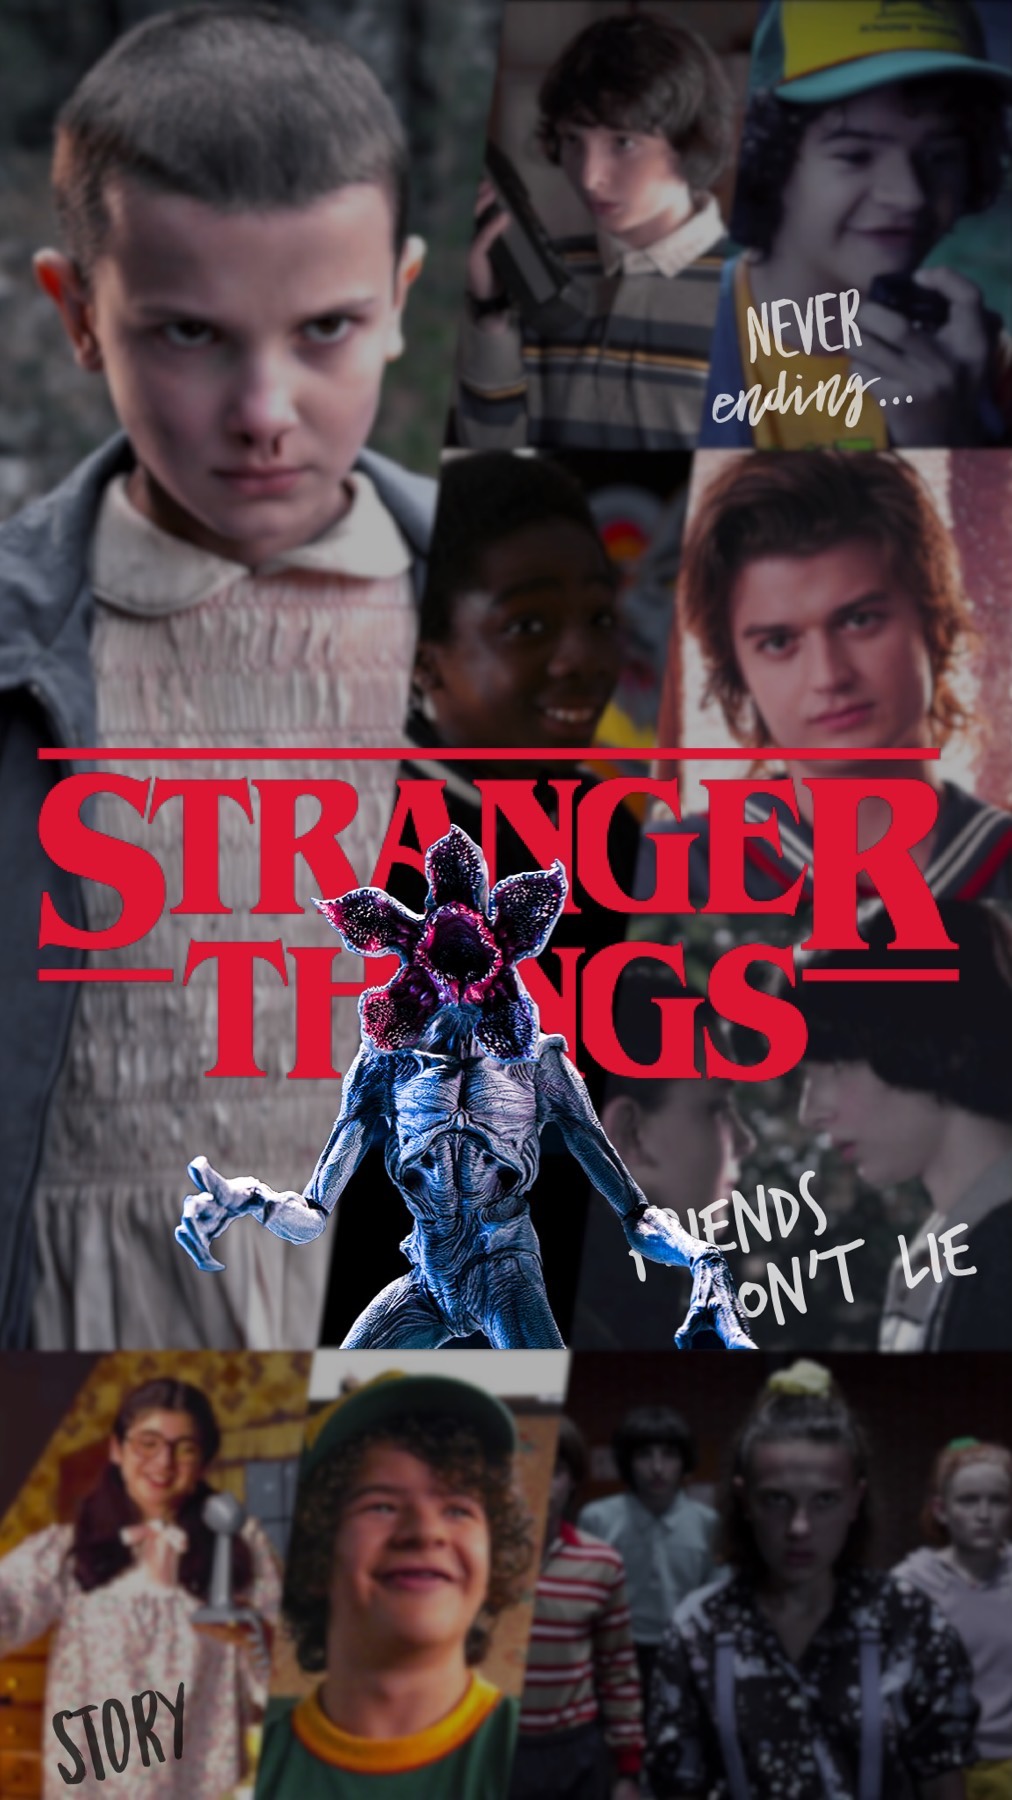 Here’s a Stranger Things wallpaper I made for a friend!
-
(I’ve never actually seen the show 😂)